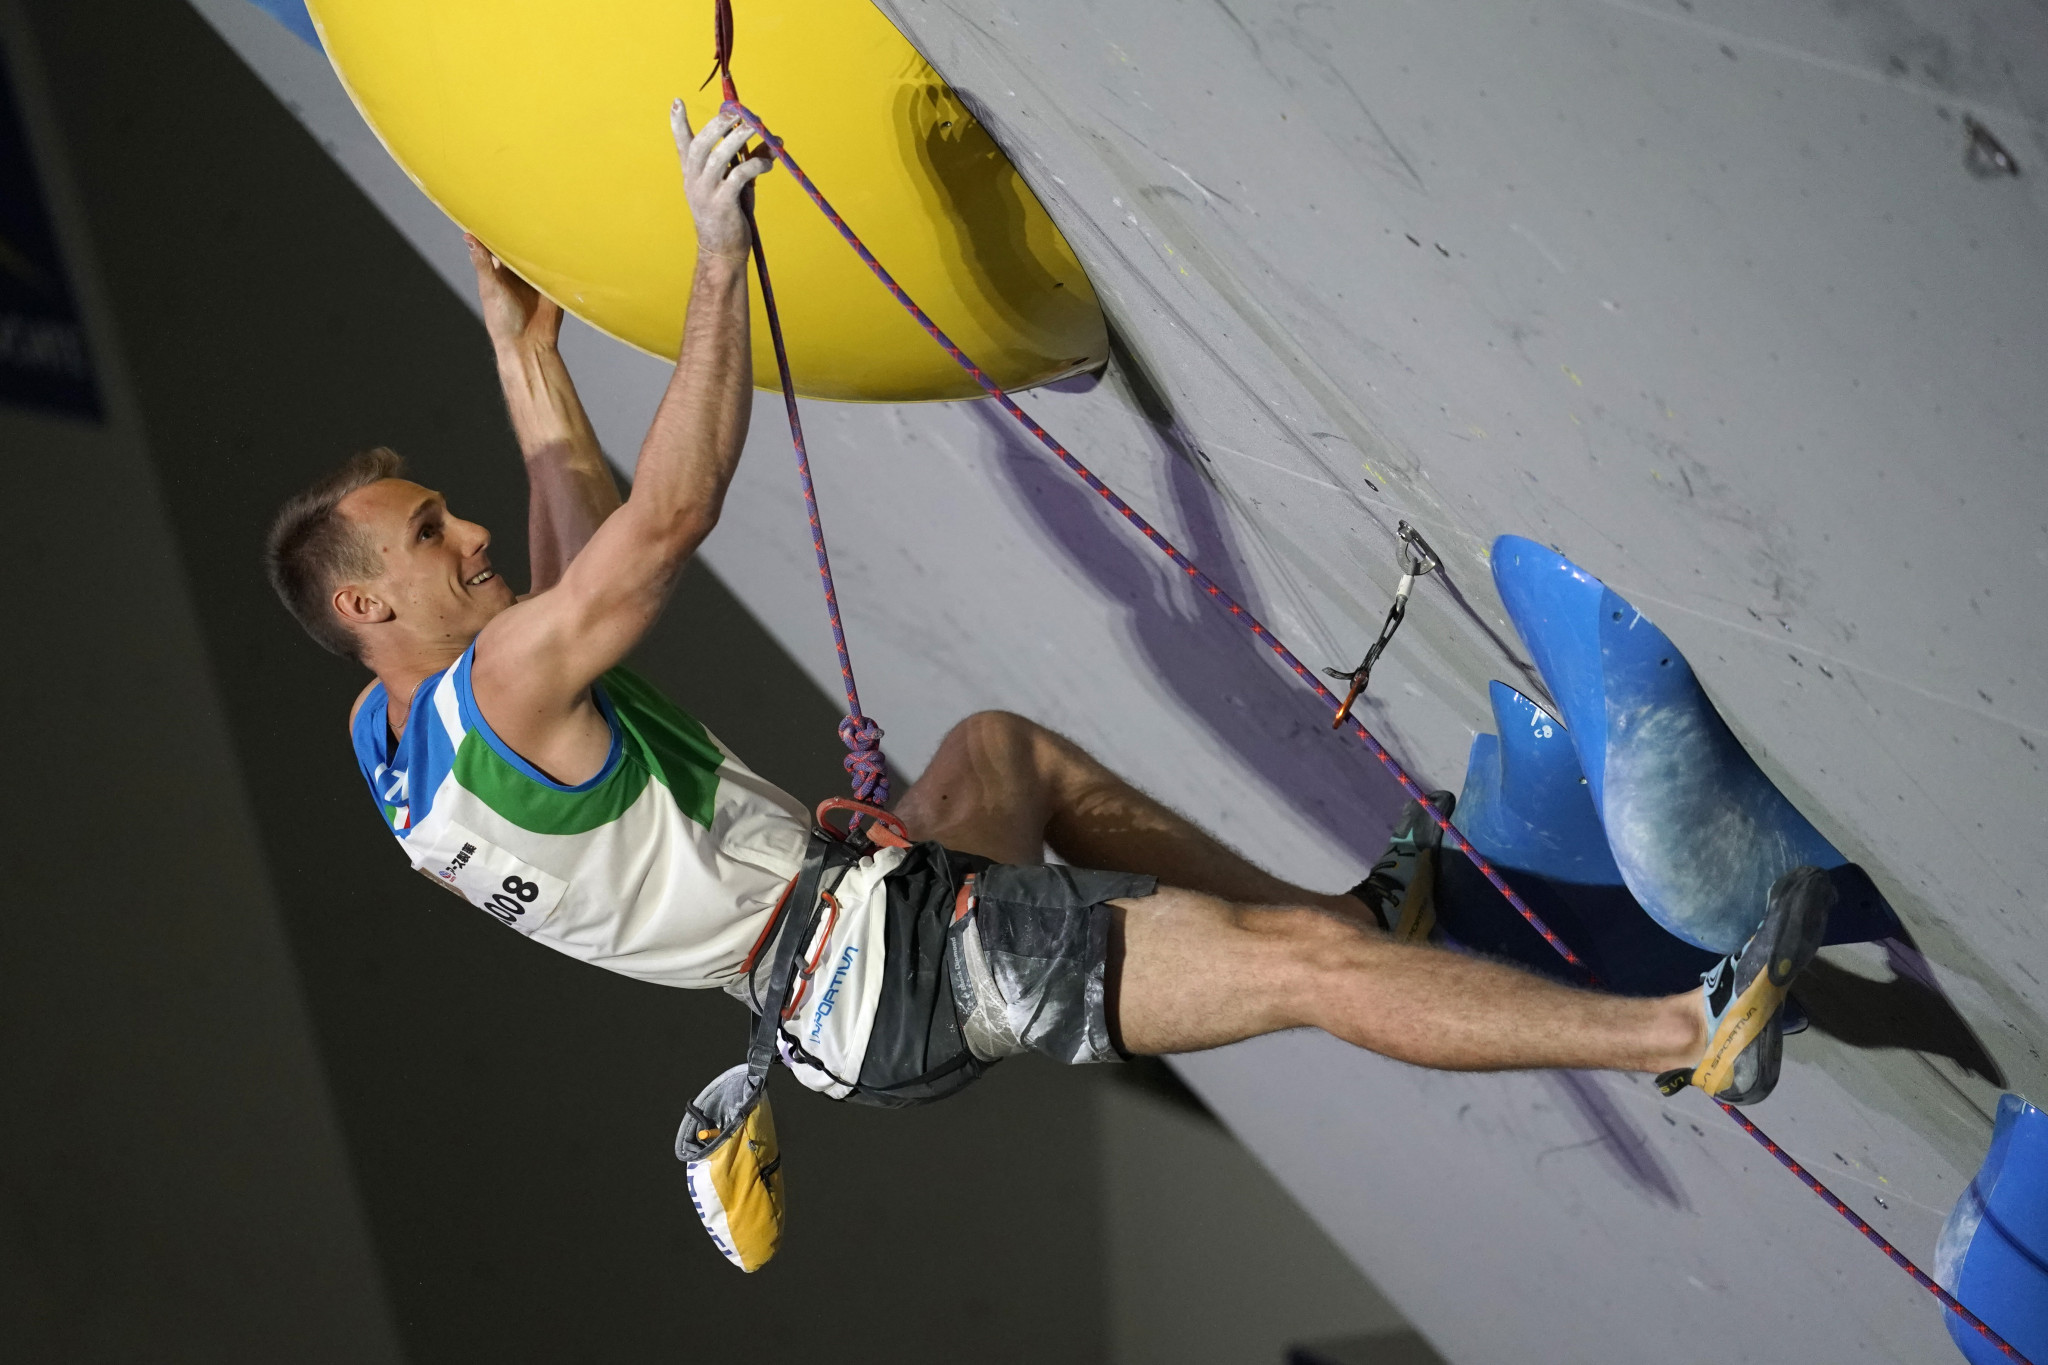 Fossali bids for IFSC Youth World Championships glory in Arco